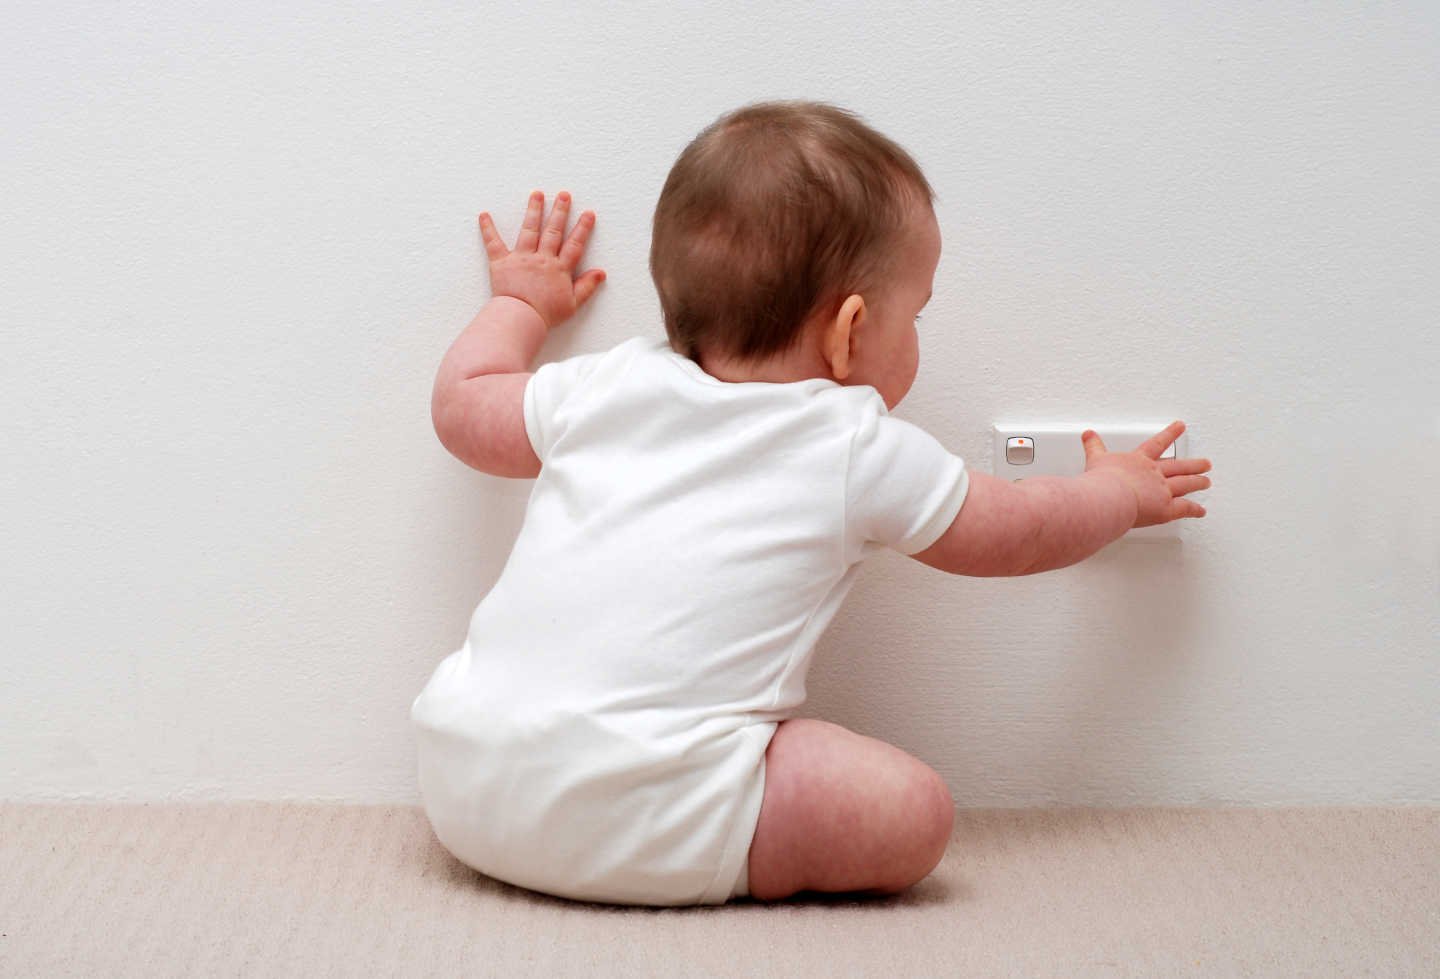 Baby reaching for plug